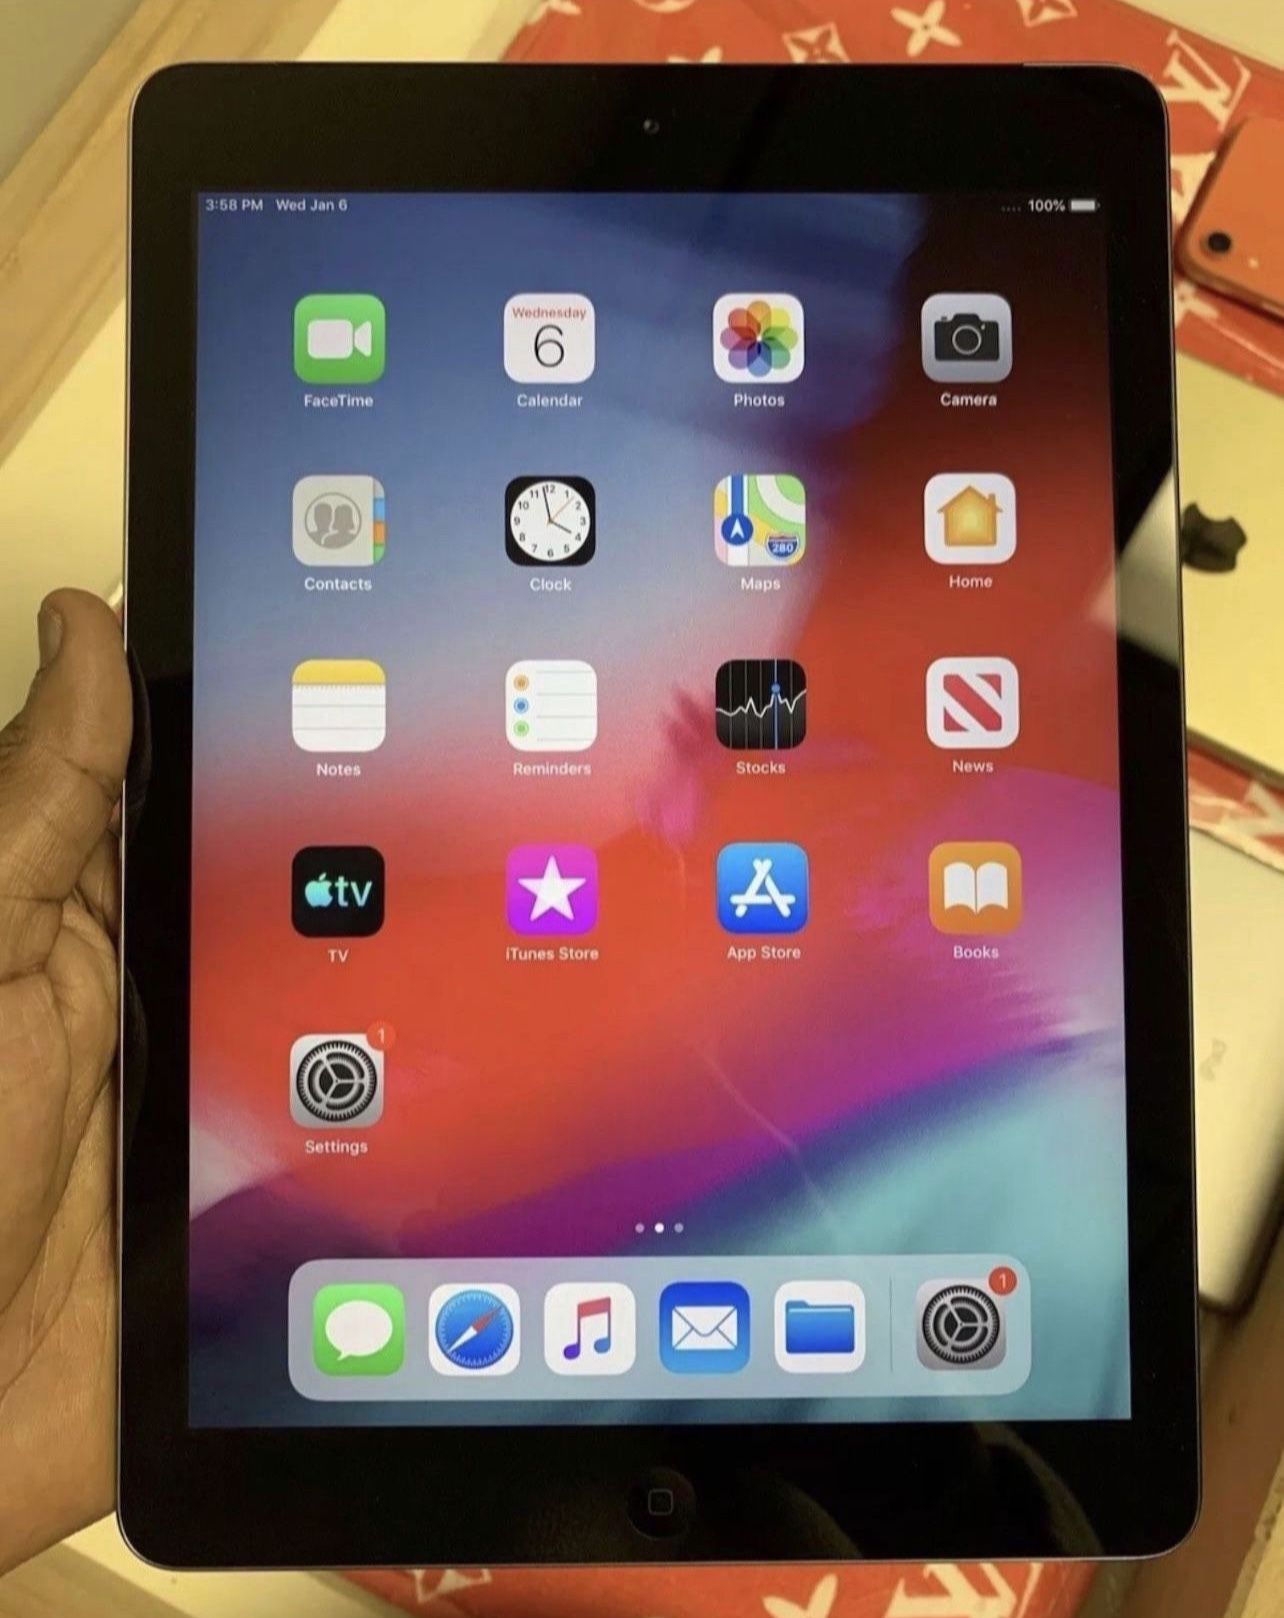 Apple iPad Air 32GB WiFi  9.7in Space Gray Excellent Condition FREE  $40 Dollars 💵💵💵 Case